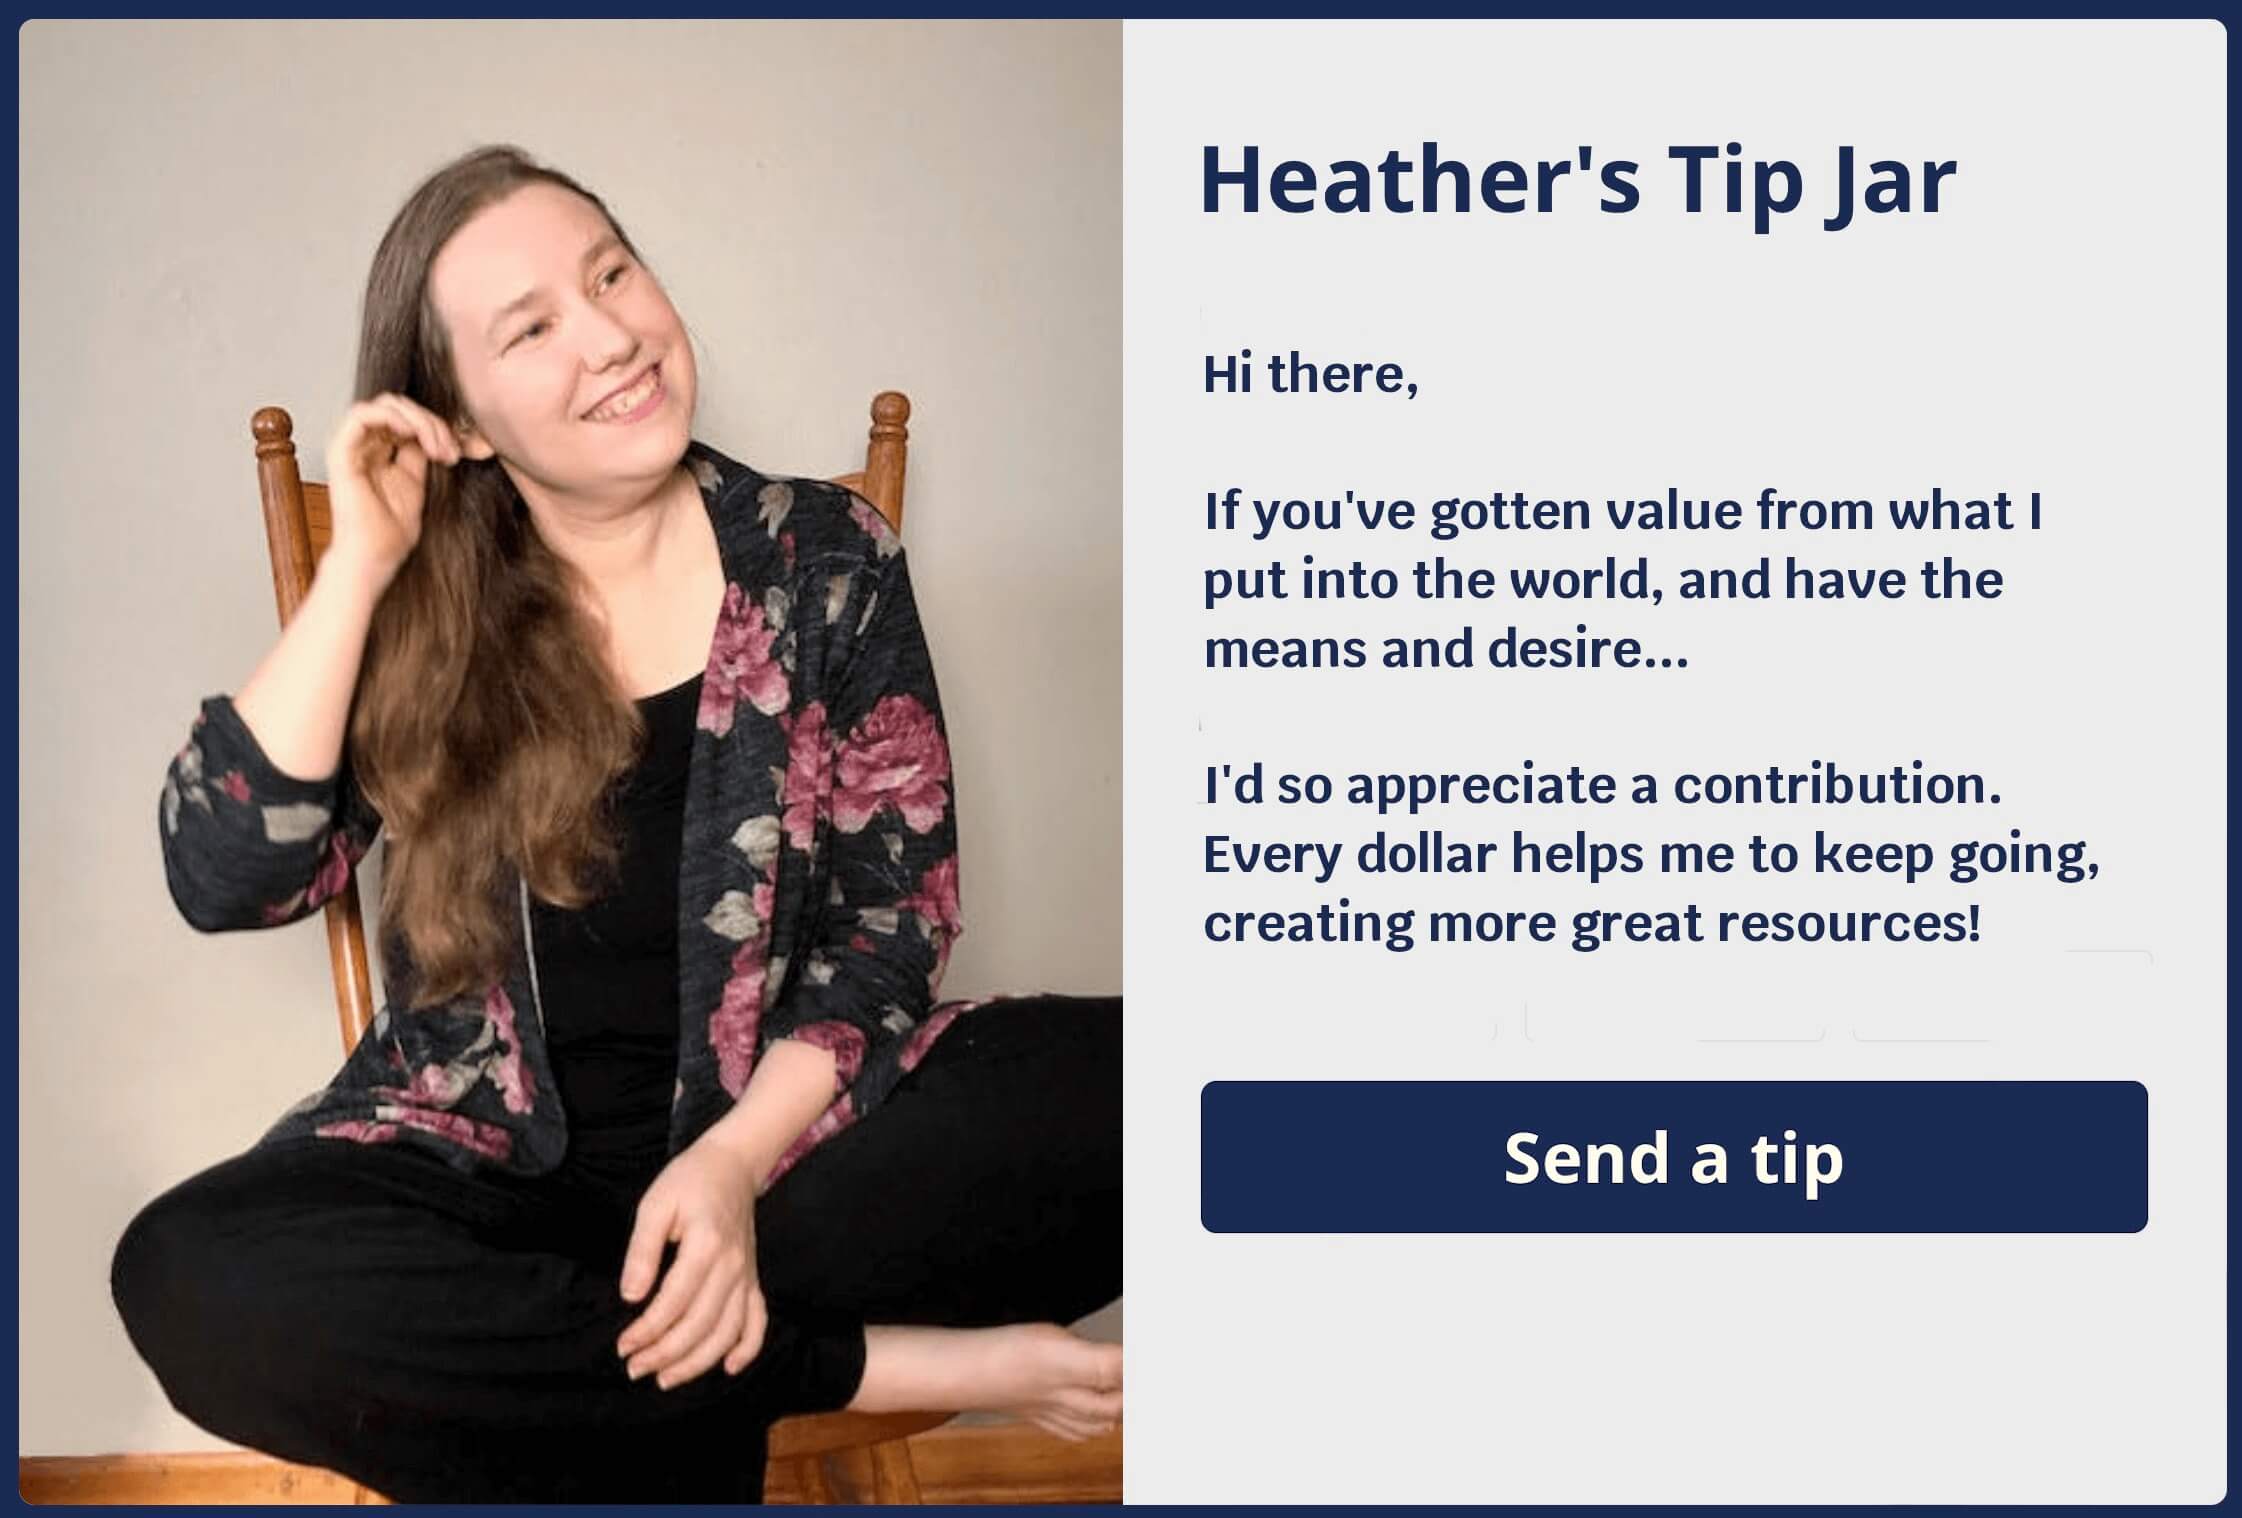 On the left side is a picture of a woman sitting cross legged on a chair and pulling her ear. On the right side are the words: "Heather's tip jar. Hi there, If you've gotten value from what I put into the world, and have the means and desire... I'd so appreciate a contribution. Every dollar helps me to keep going, creating more great resources! Send a tip"